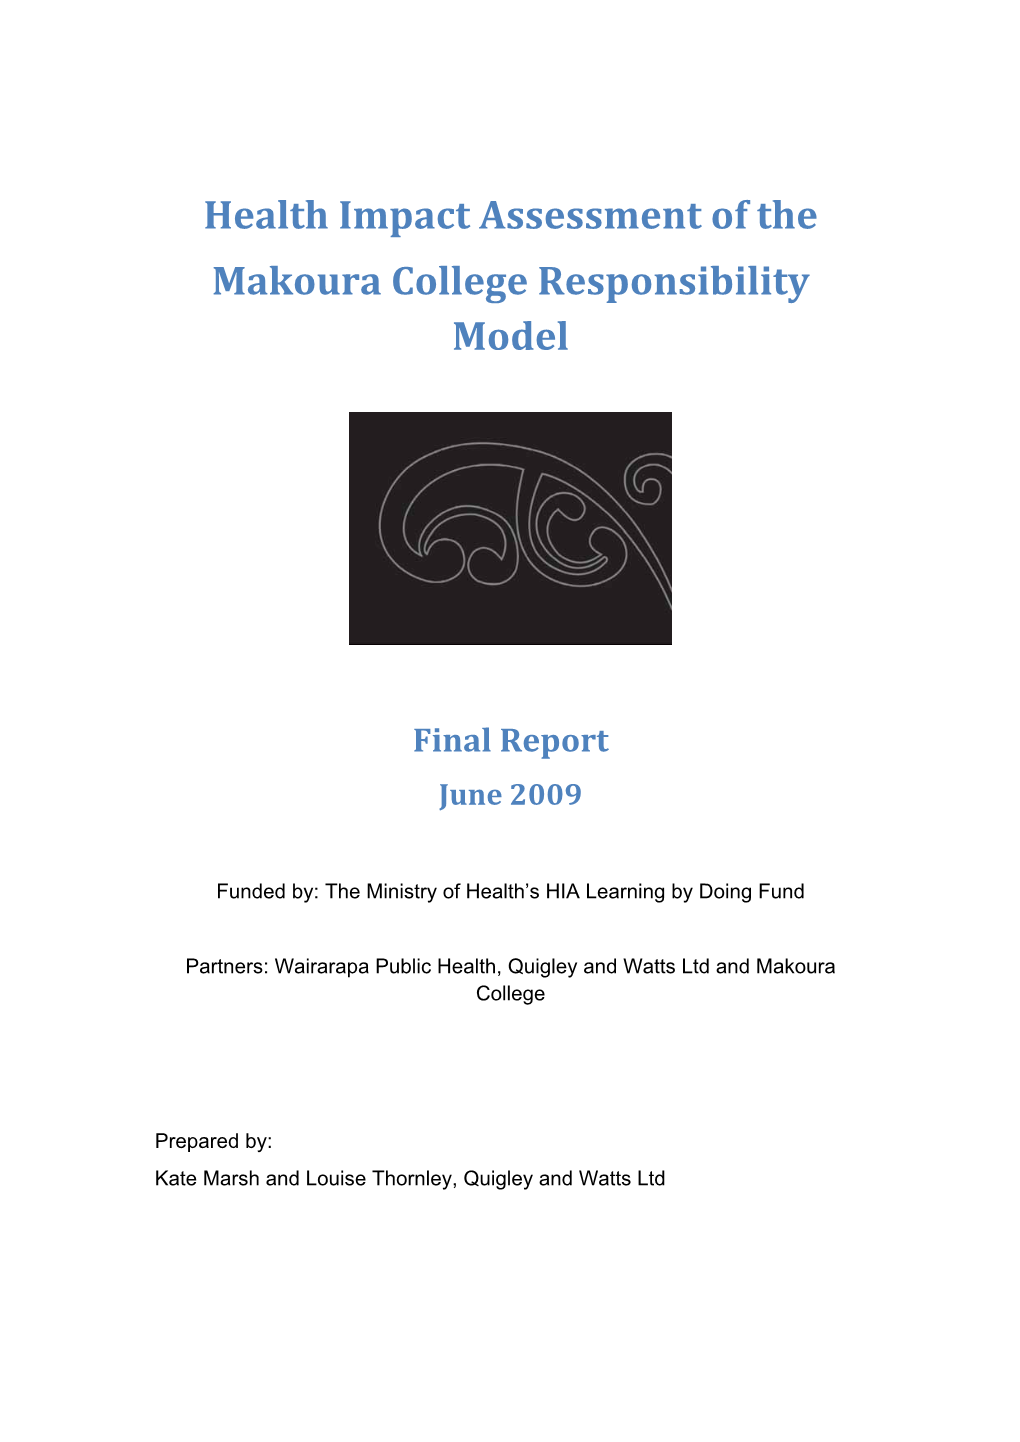 Health Impact Assessment of the Makoura College Responsibility Model